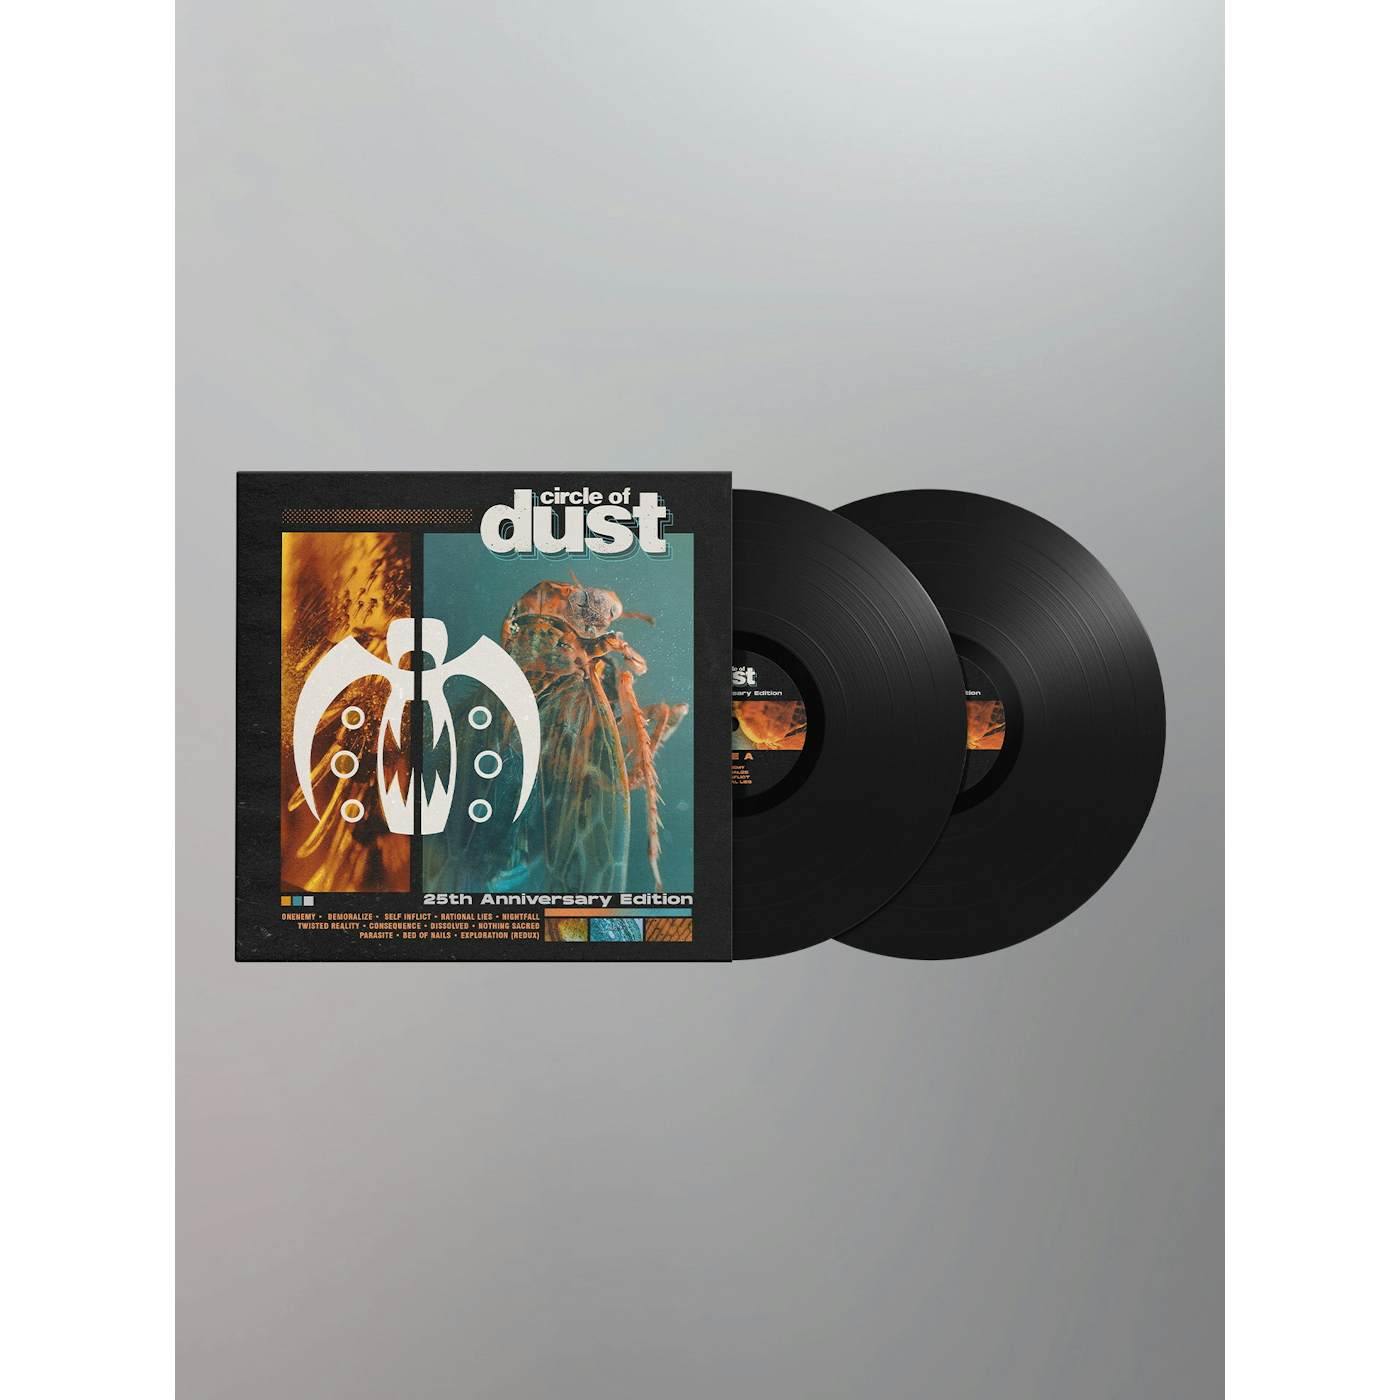 Circle of Dust - 25th Anniversary Edition [Limited Edition - Double Vinyl]